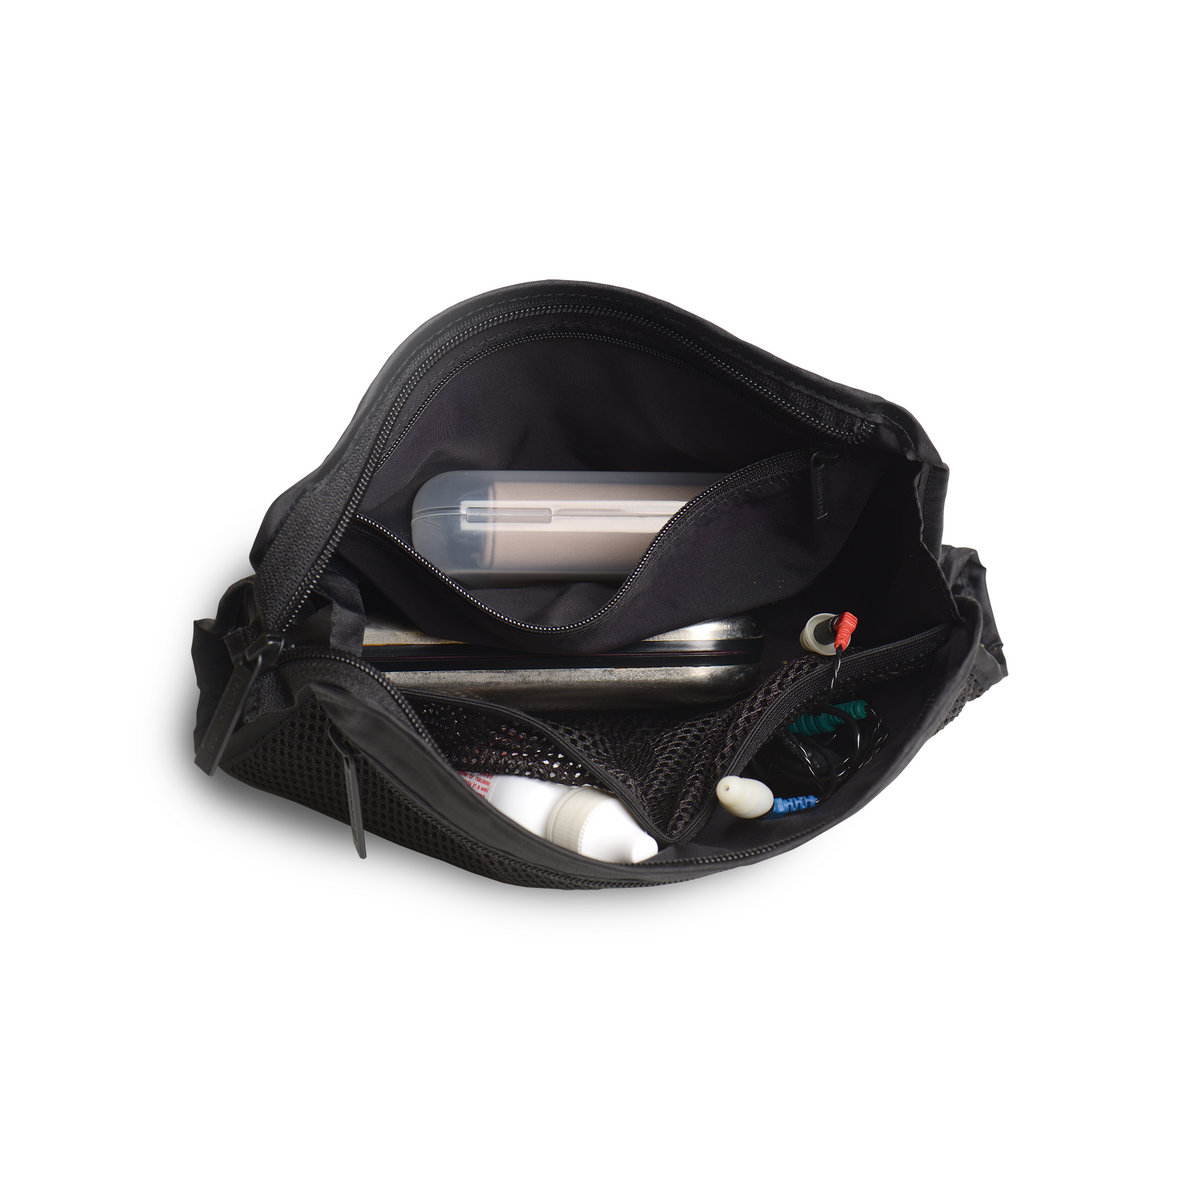 Lifestyle. Top down view of a loaded travel organizer unzipped and splayed open to show the case holding and organizing glasses cases, eye drops, ear plugs, headphones, and misc easily in separate internal compartments.